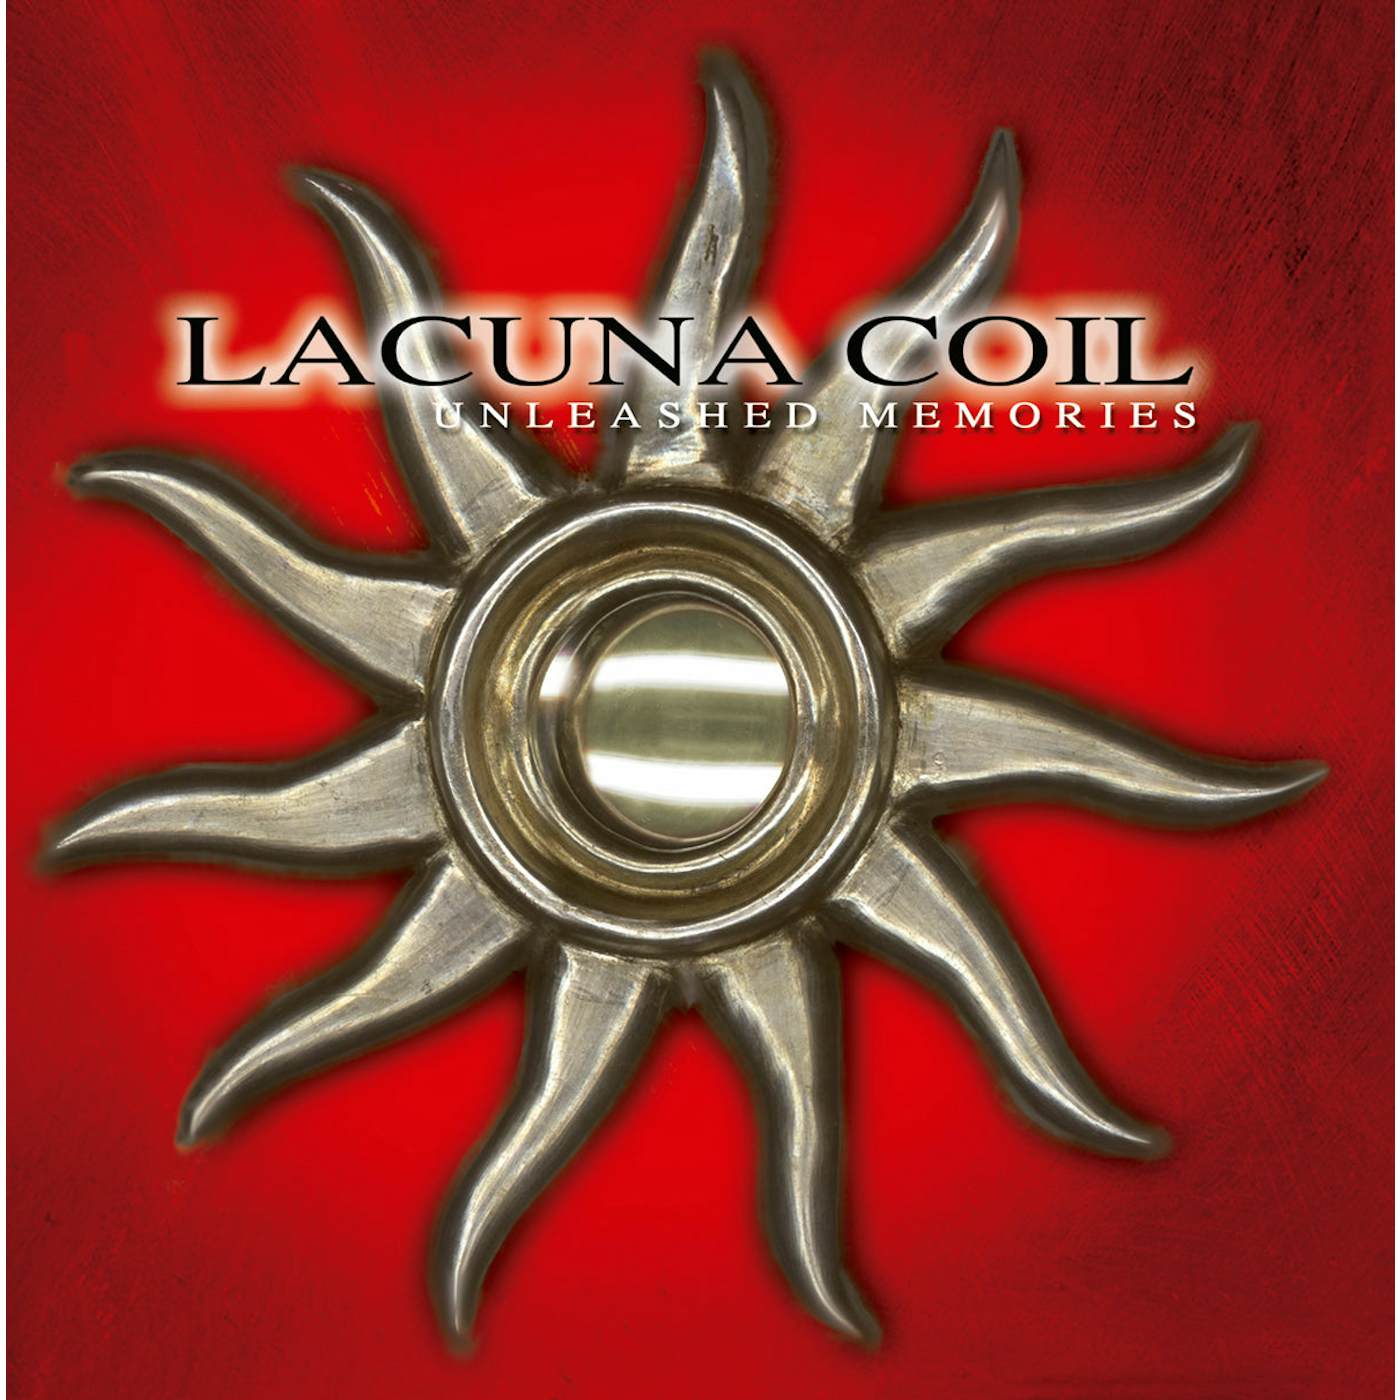 Lacuna Coil "Unleashed Memories (Clear / Oxblood Splatter)" 12"